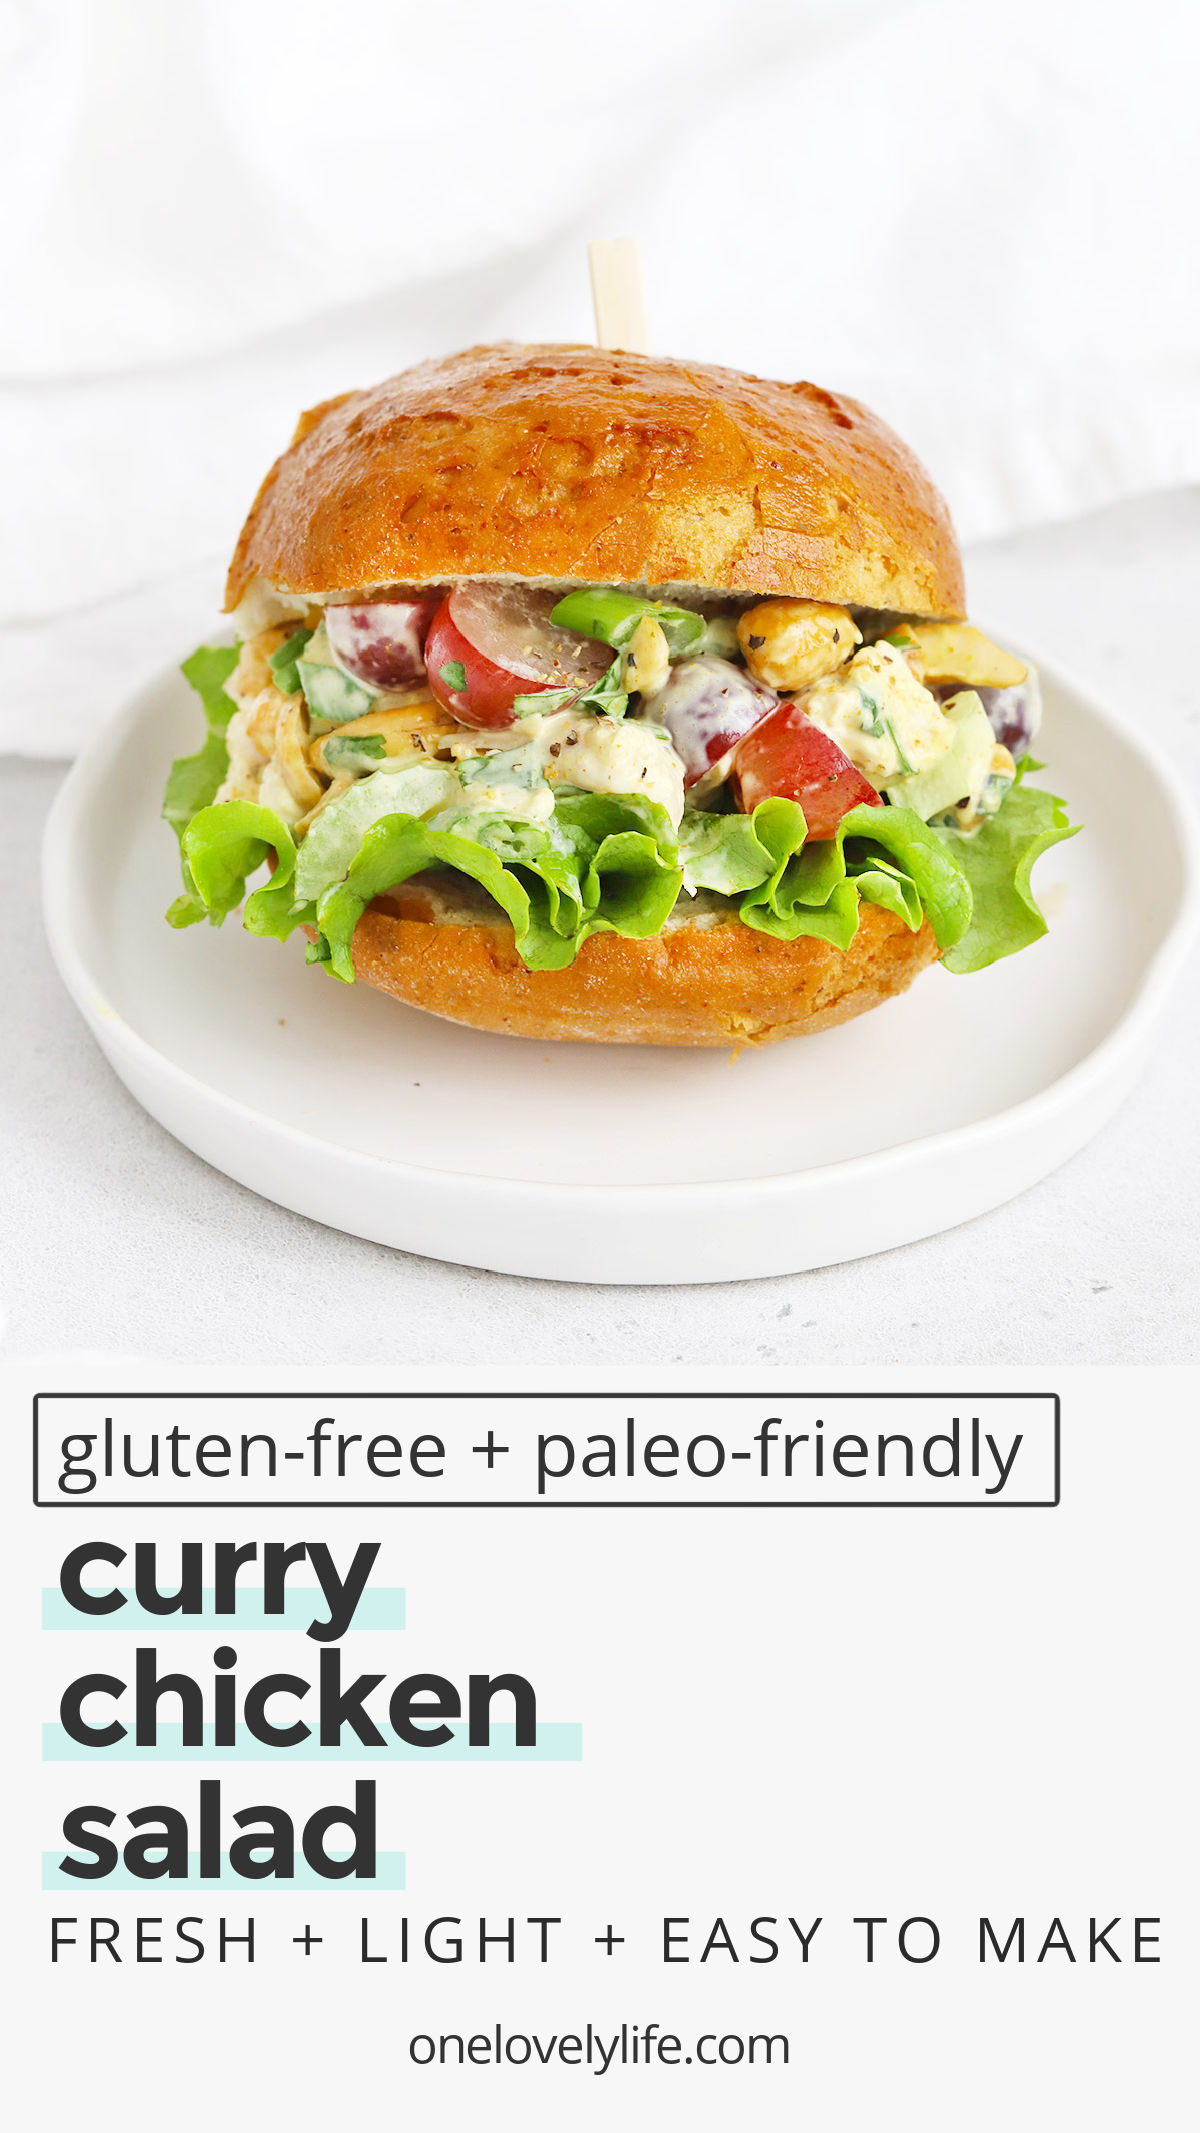 Curry Chicken Salad - Our healthy curry chicken salad with grapes is easy, fresh, and delicious. A perfect easy lunch or dinner any day of the week. (Gluten-Free, Paleo-Friendly, Whole30-Friendly) // Paleo Curry Chicken Salad // Whole30 Curry Chicken Salad // Healthy Meal-Prep Lunch